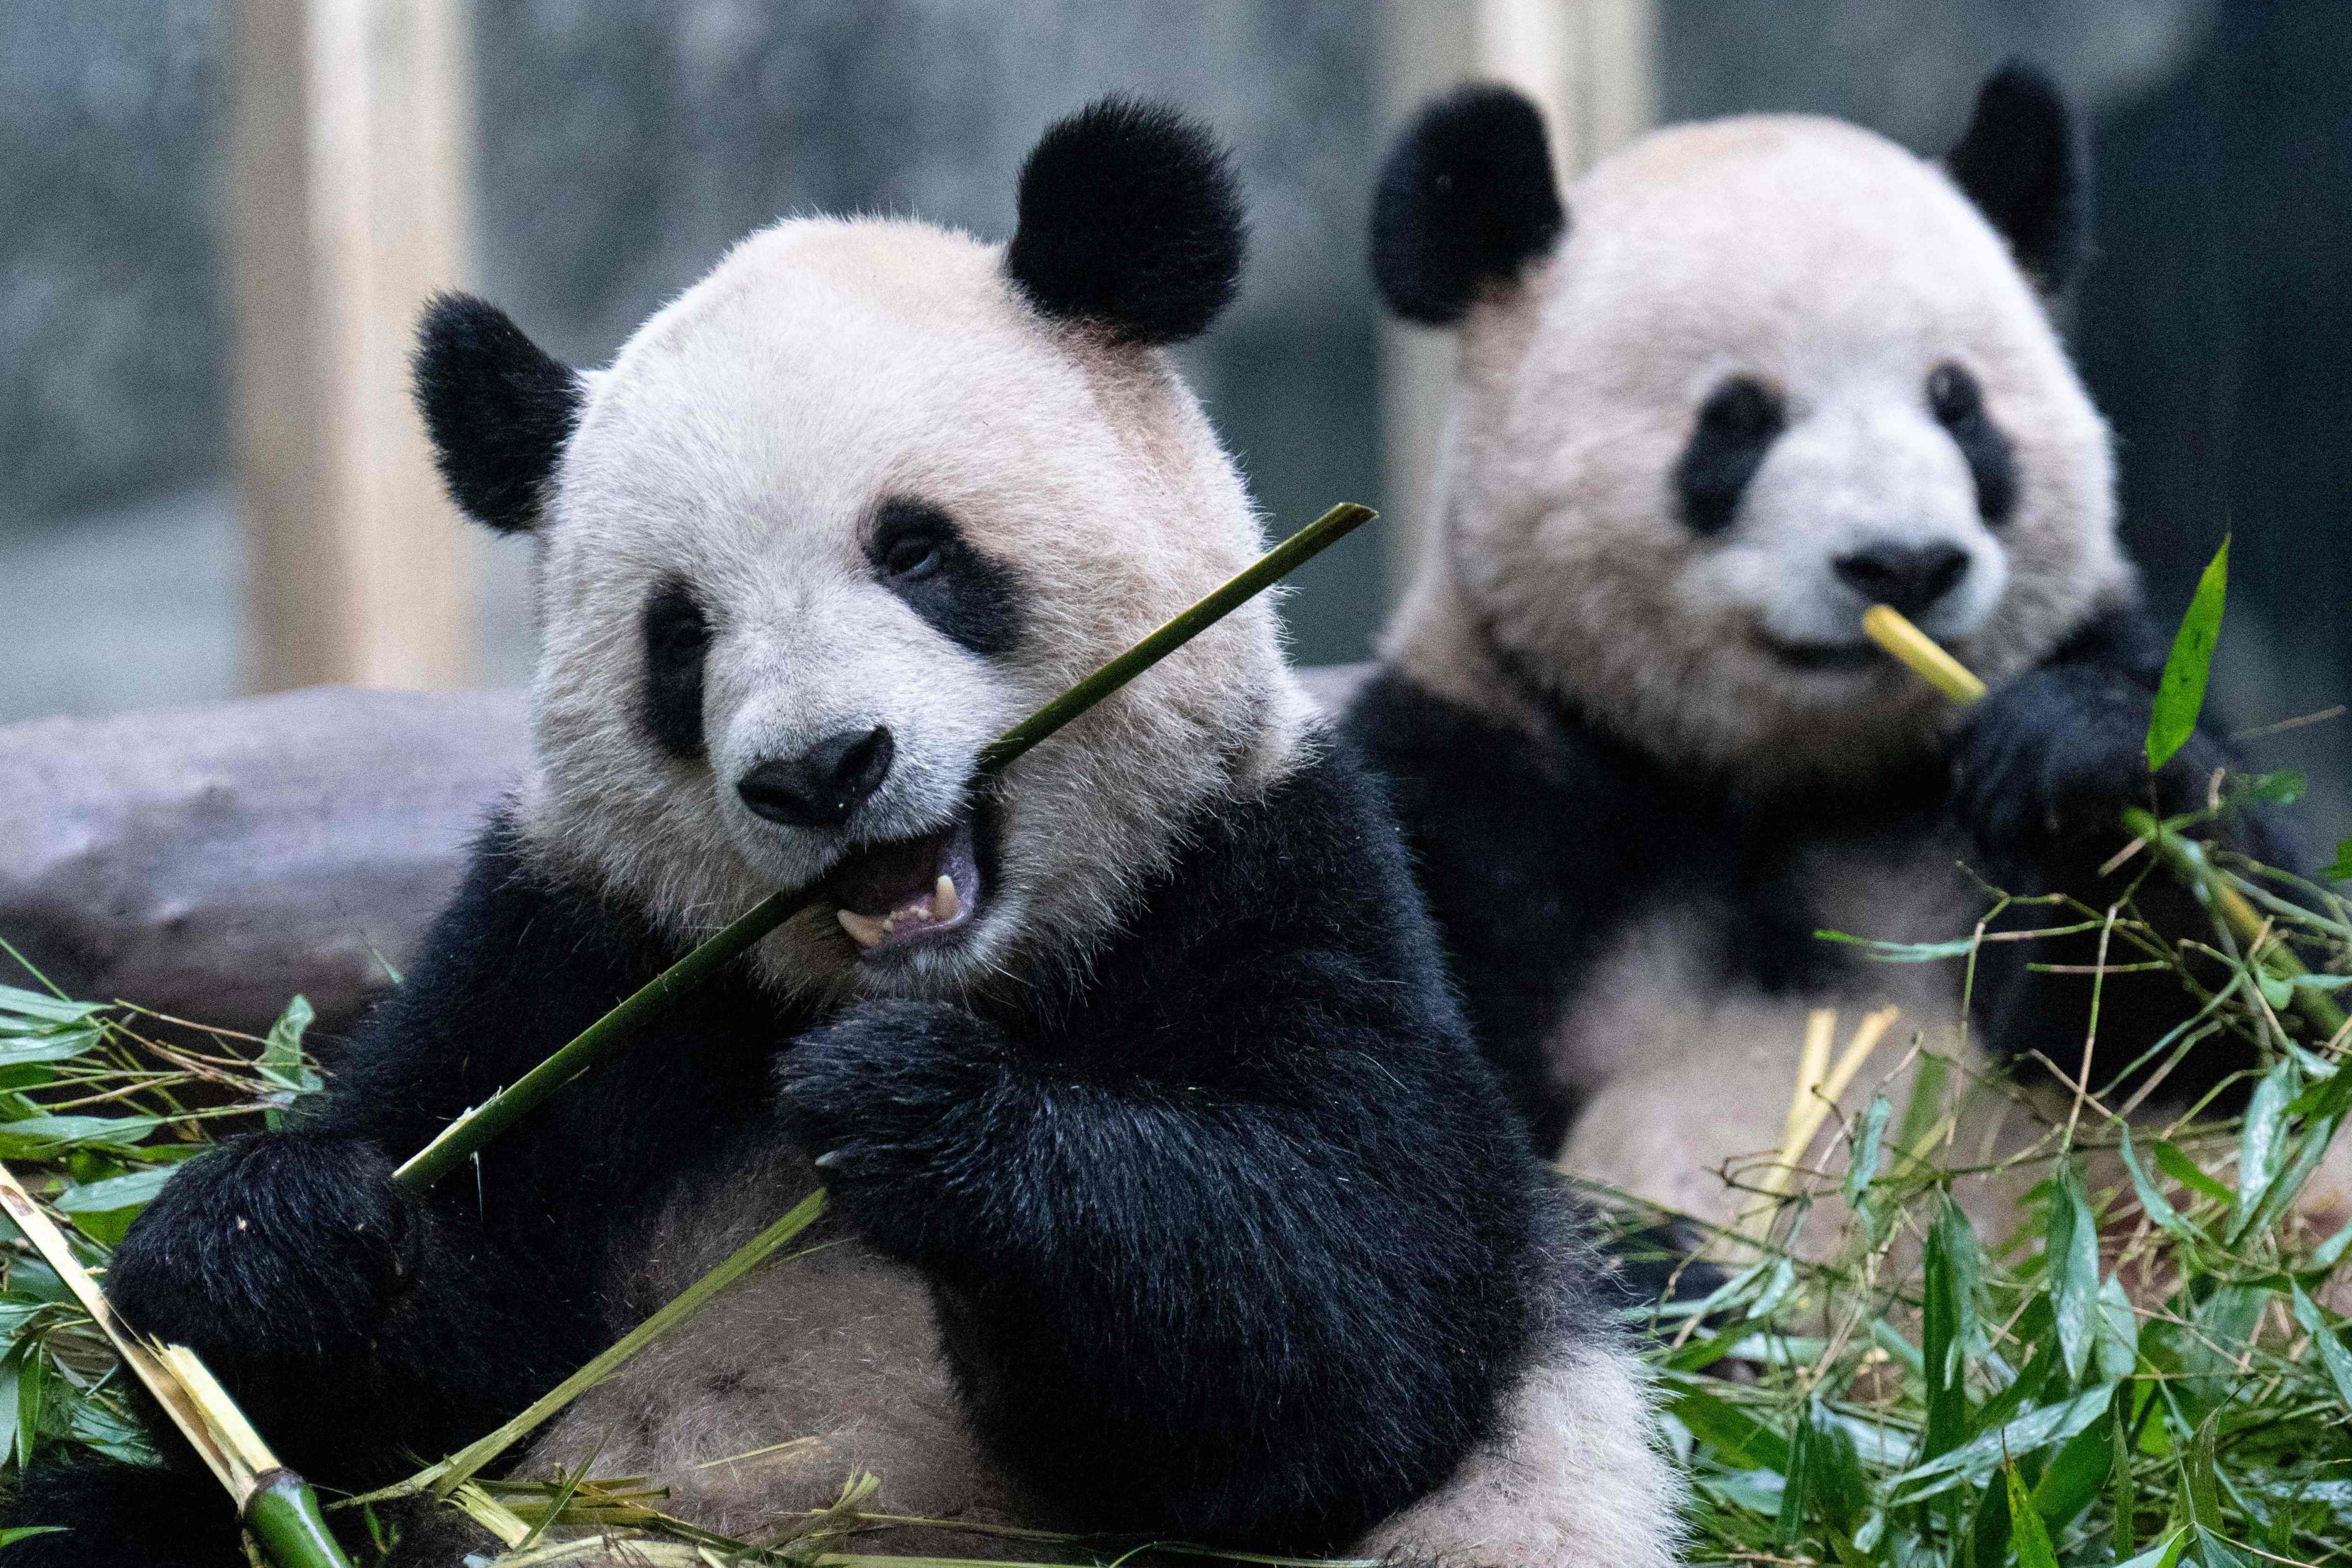 Two giant pandas are expected to arrive in San Francisco next year. Photo: AFP